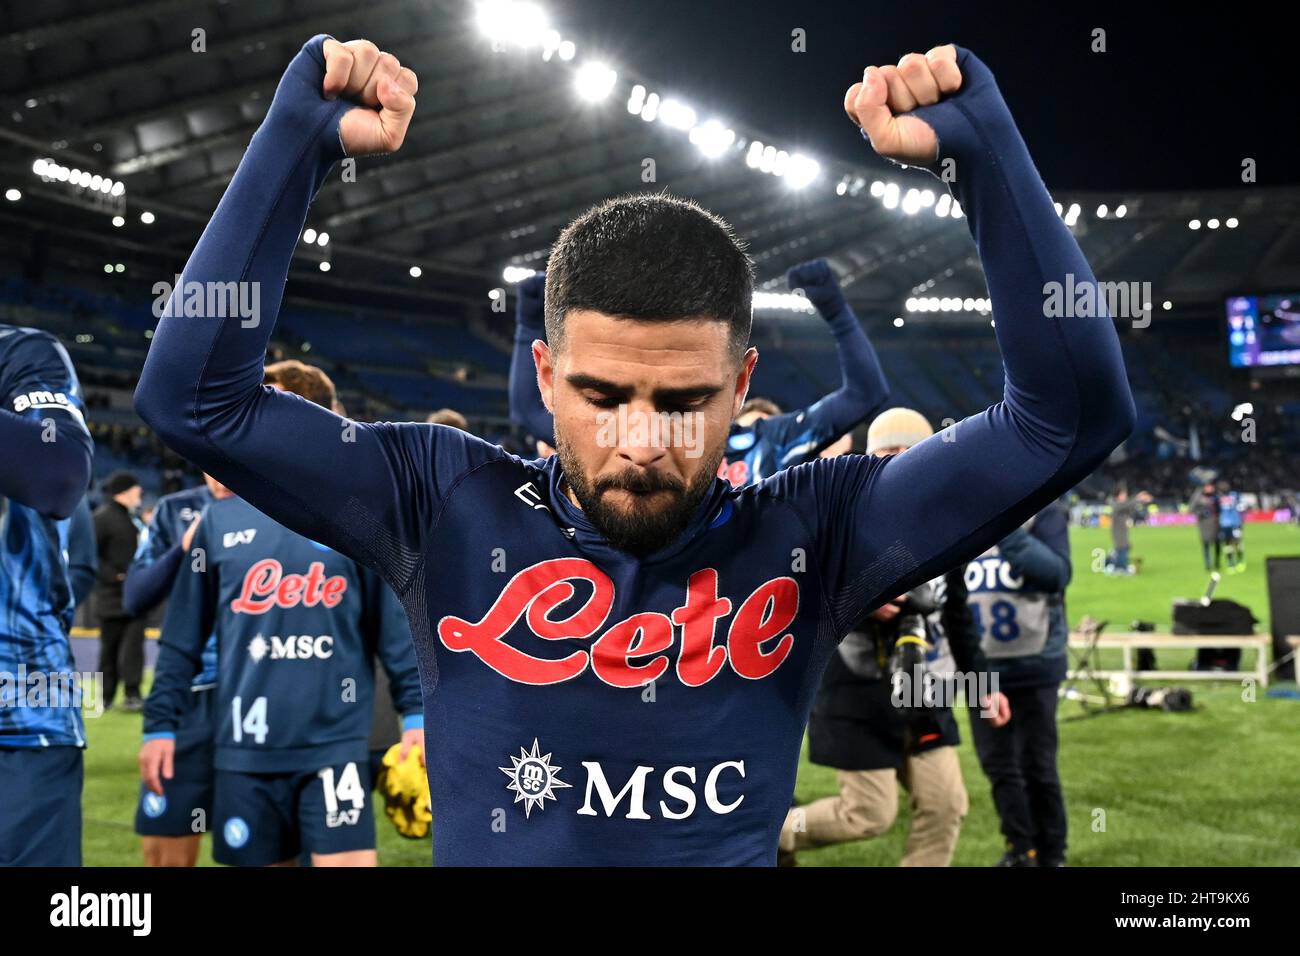 Roma, Italy. 27th Feb, 2022. Lorenzo Insigne of SSC Napoli celebrates at the end of the Serie A football match between SS Lazio and SSC Napoli at Olimpico stadium in Rome (Italy), February 27th, 2022. Photo Andrea Staccioli/Insidefoto Credit: insidefoto srl/Alamy Live News Stock Photo